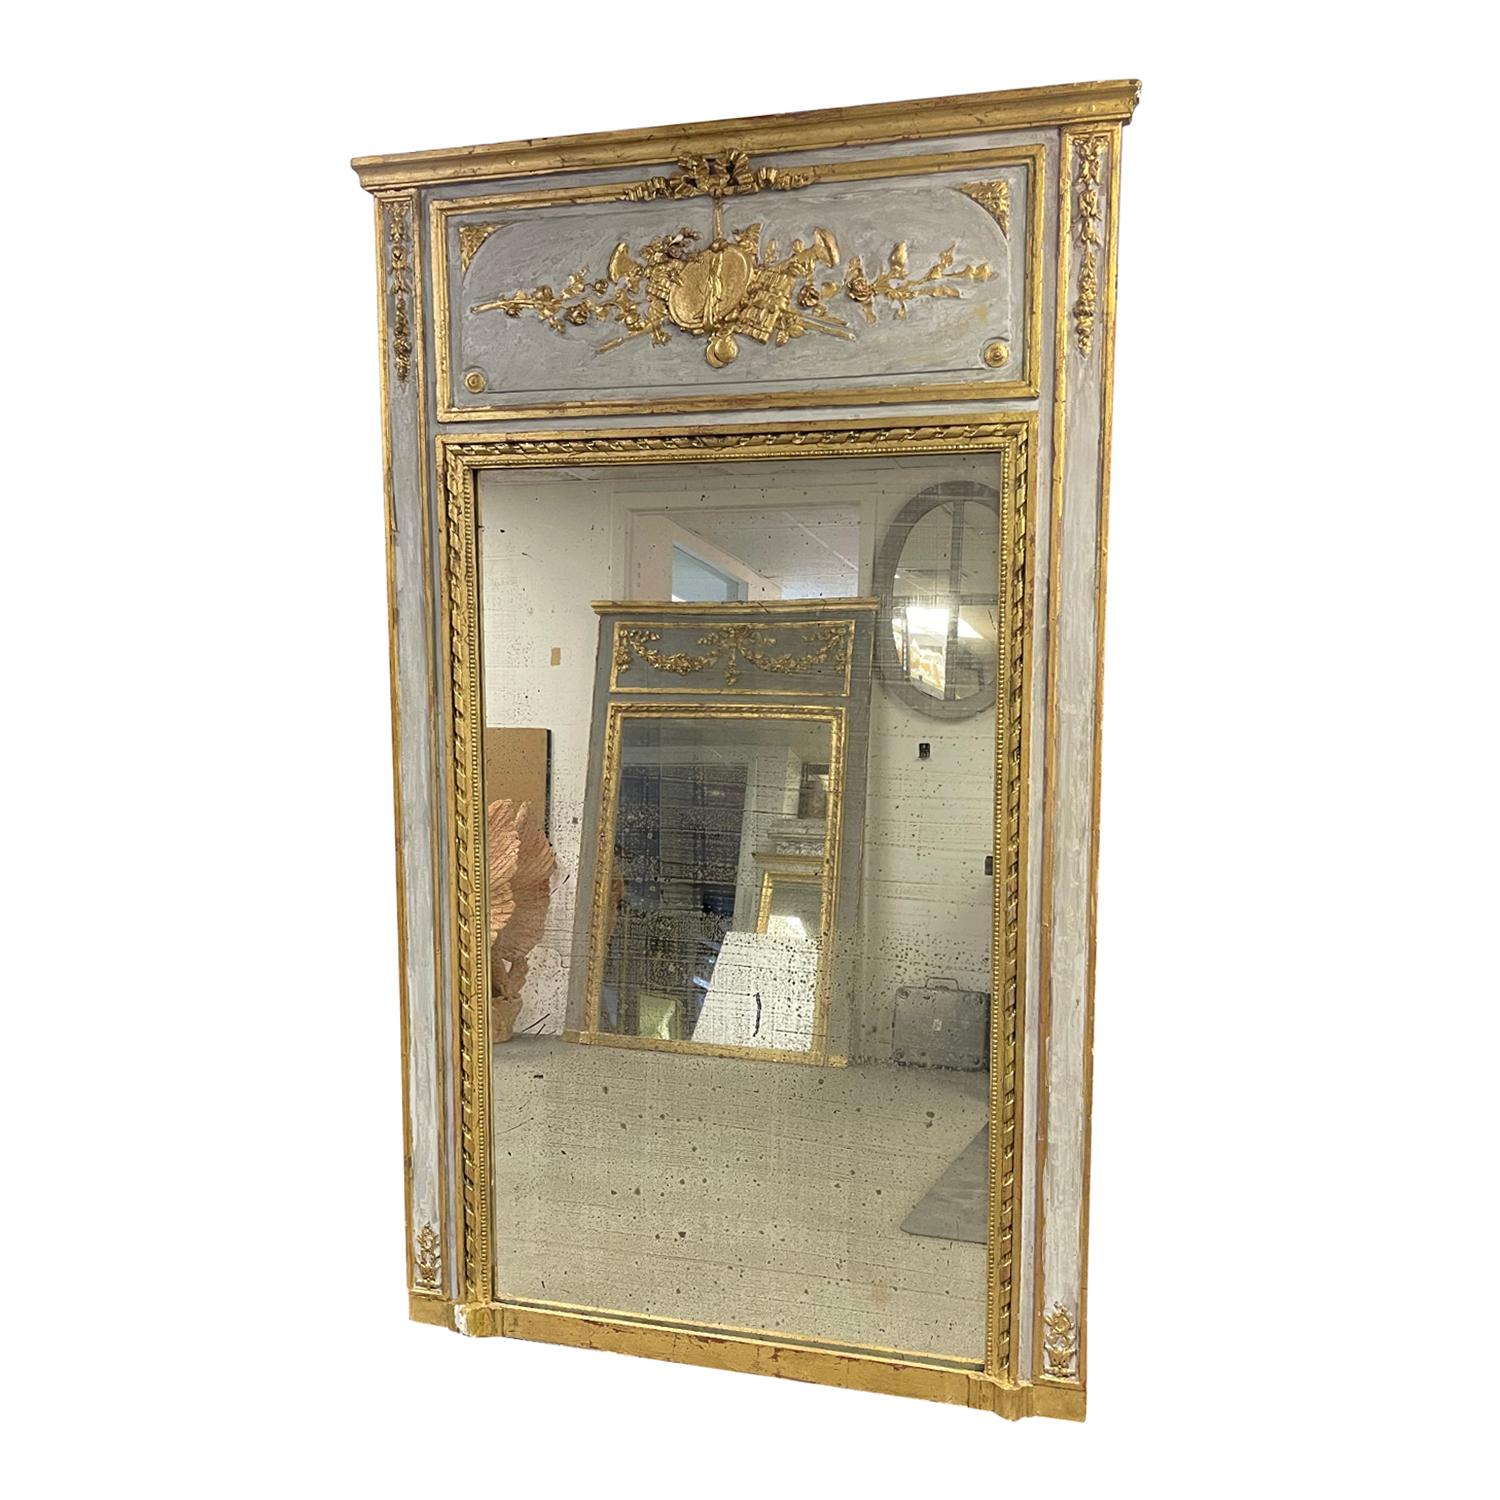 A typical 19th century French carved and partial gilded Trumeau mirror, in good condition. The antique Floor mirror is consisting its original mirrored glass. The panel top has been richly adorned with meticulous carvings the 18th century technique